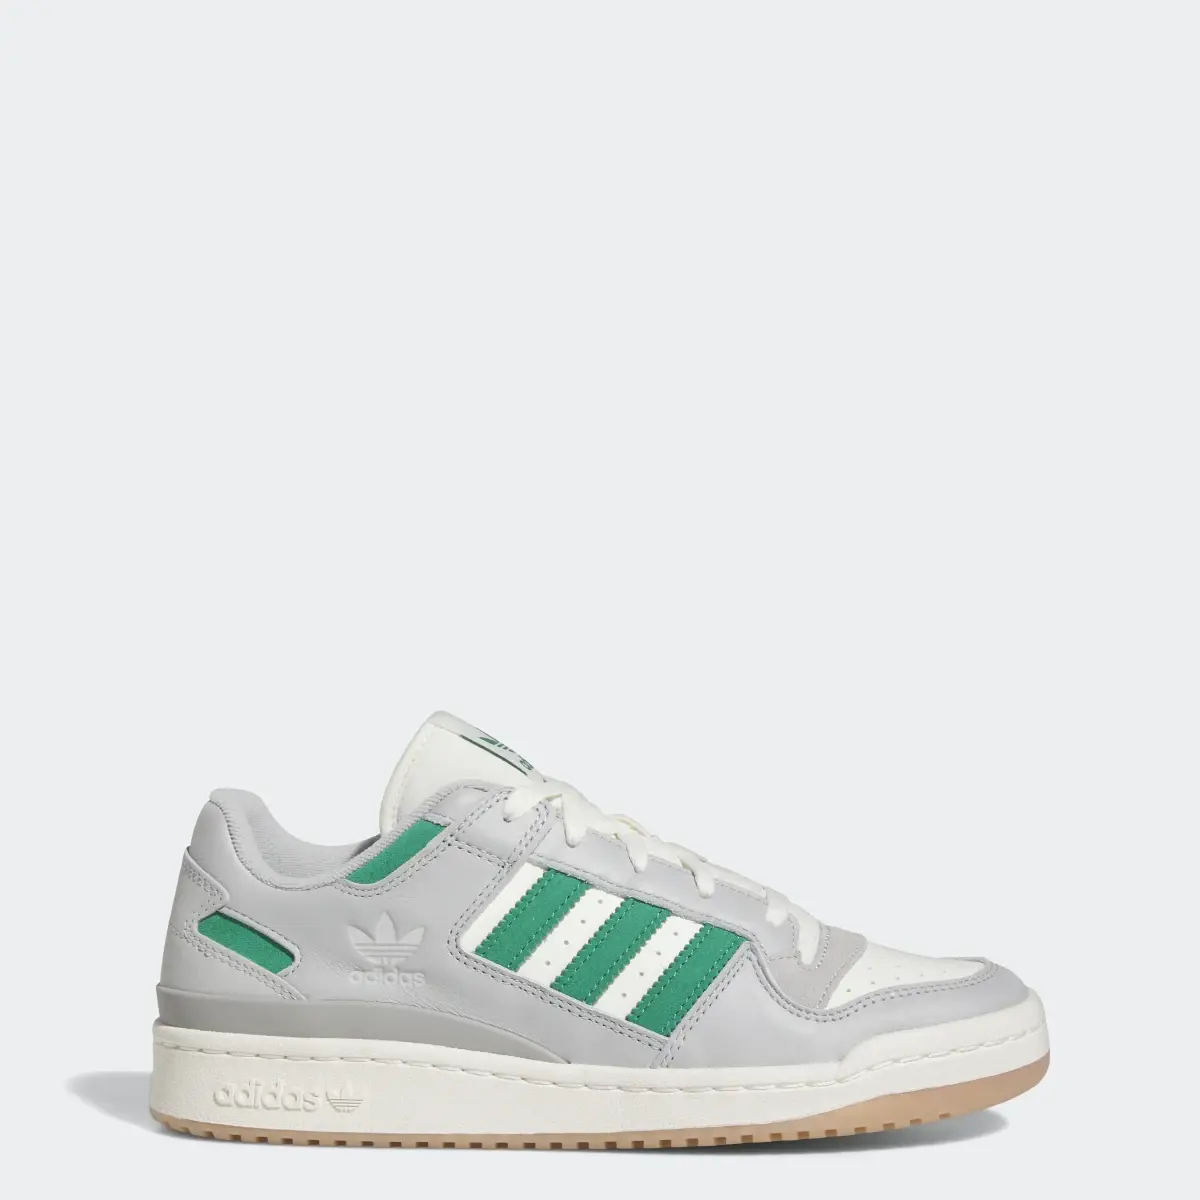 Adidas Forum Low Classic Shoes. 1